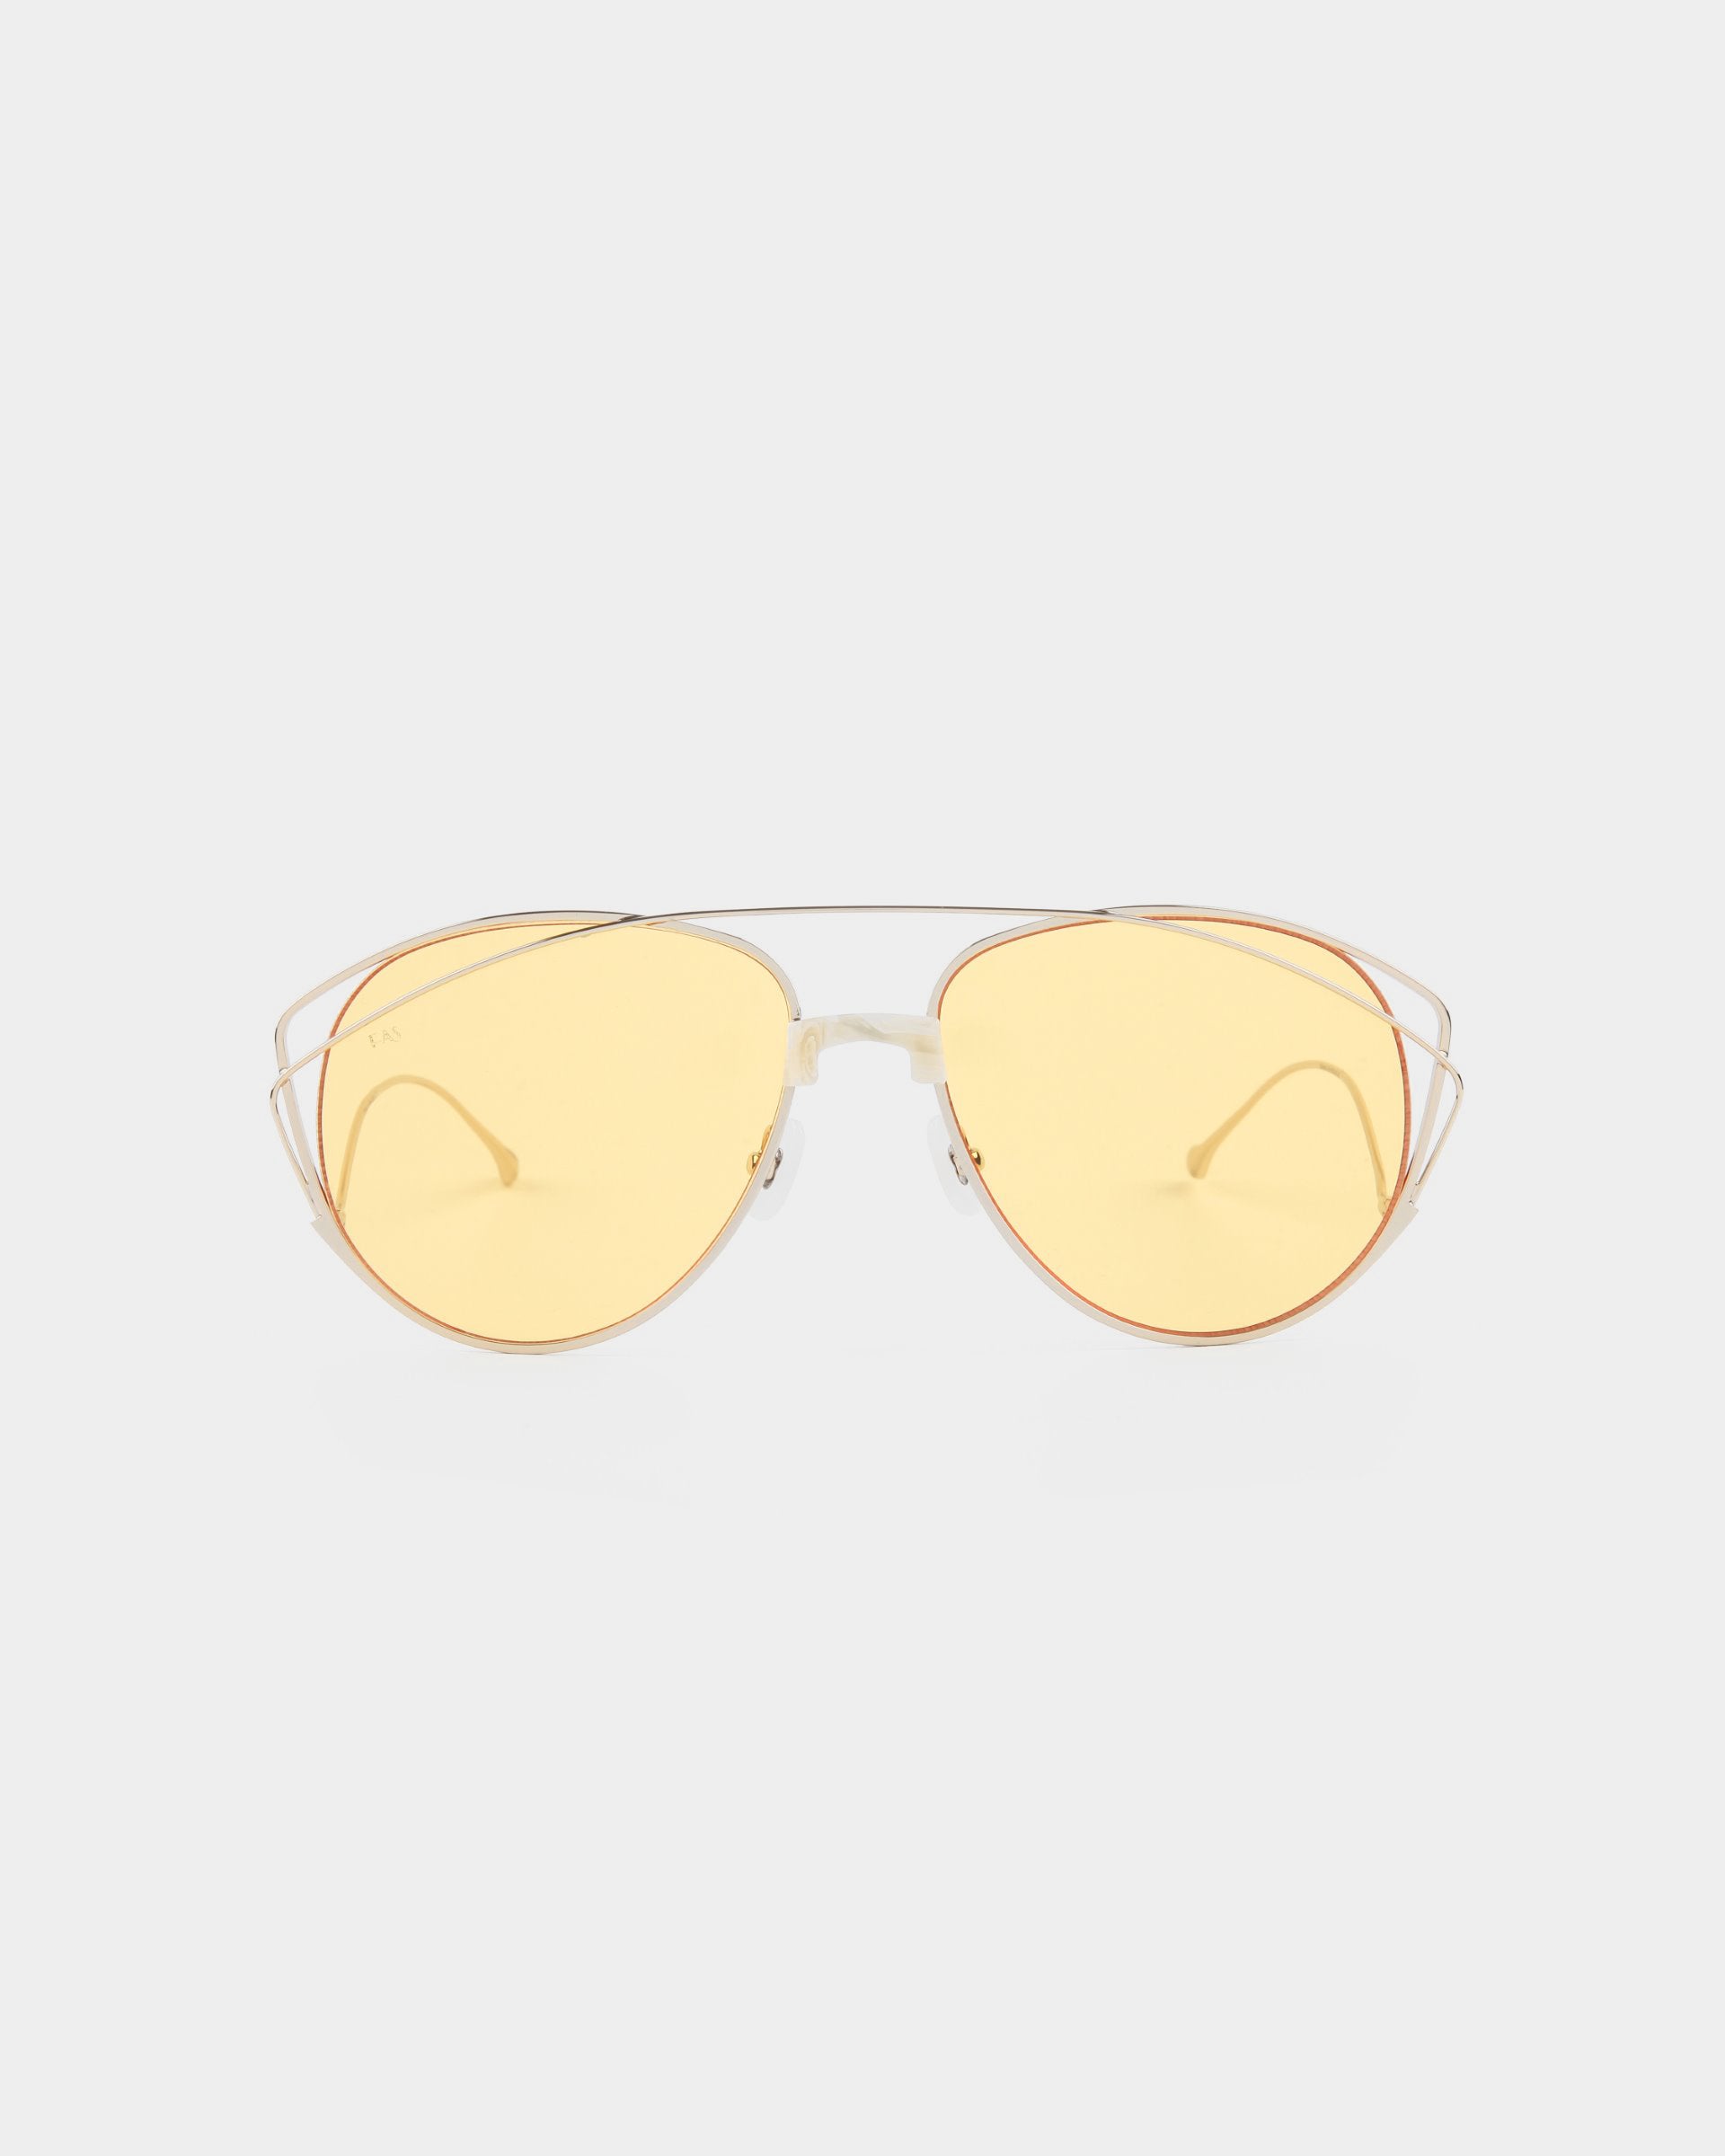 A pair of stylish For Art&#39;s Sake® Dark Eyes sunglasses with thin, stainless steel frames and yellow-tinted, nylon lenses. The design features a double bridge and sleek, minimalistic arms. Offering 100% UV protection, these sunglasses are set against a plain, white background.